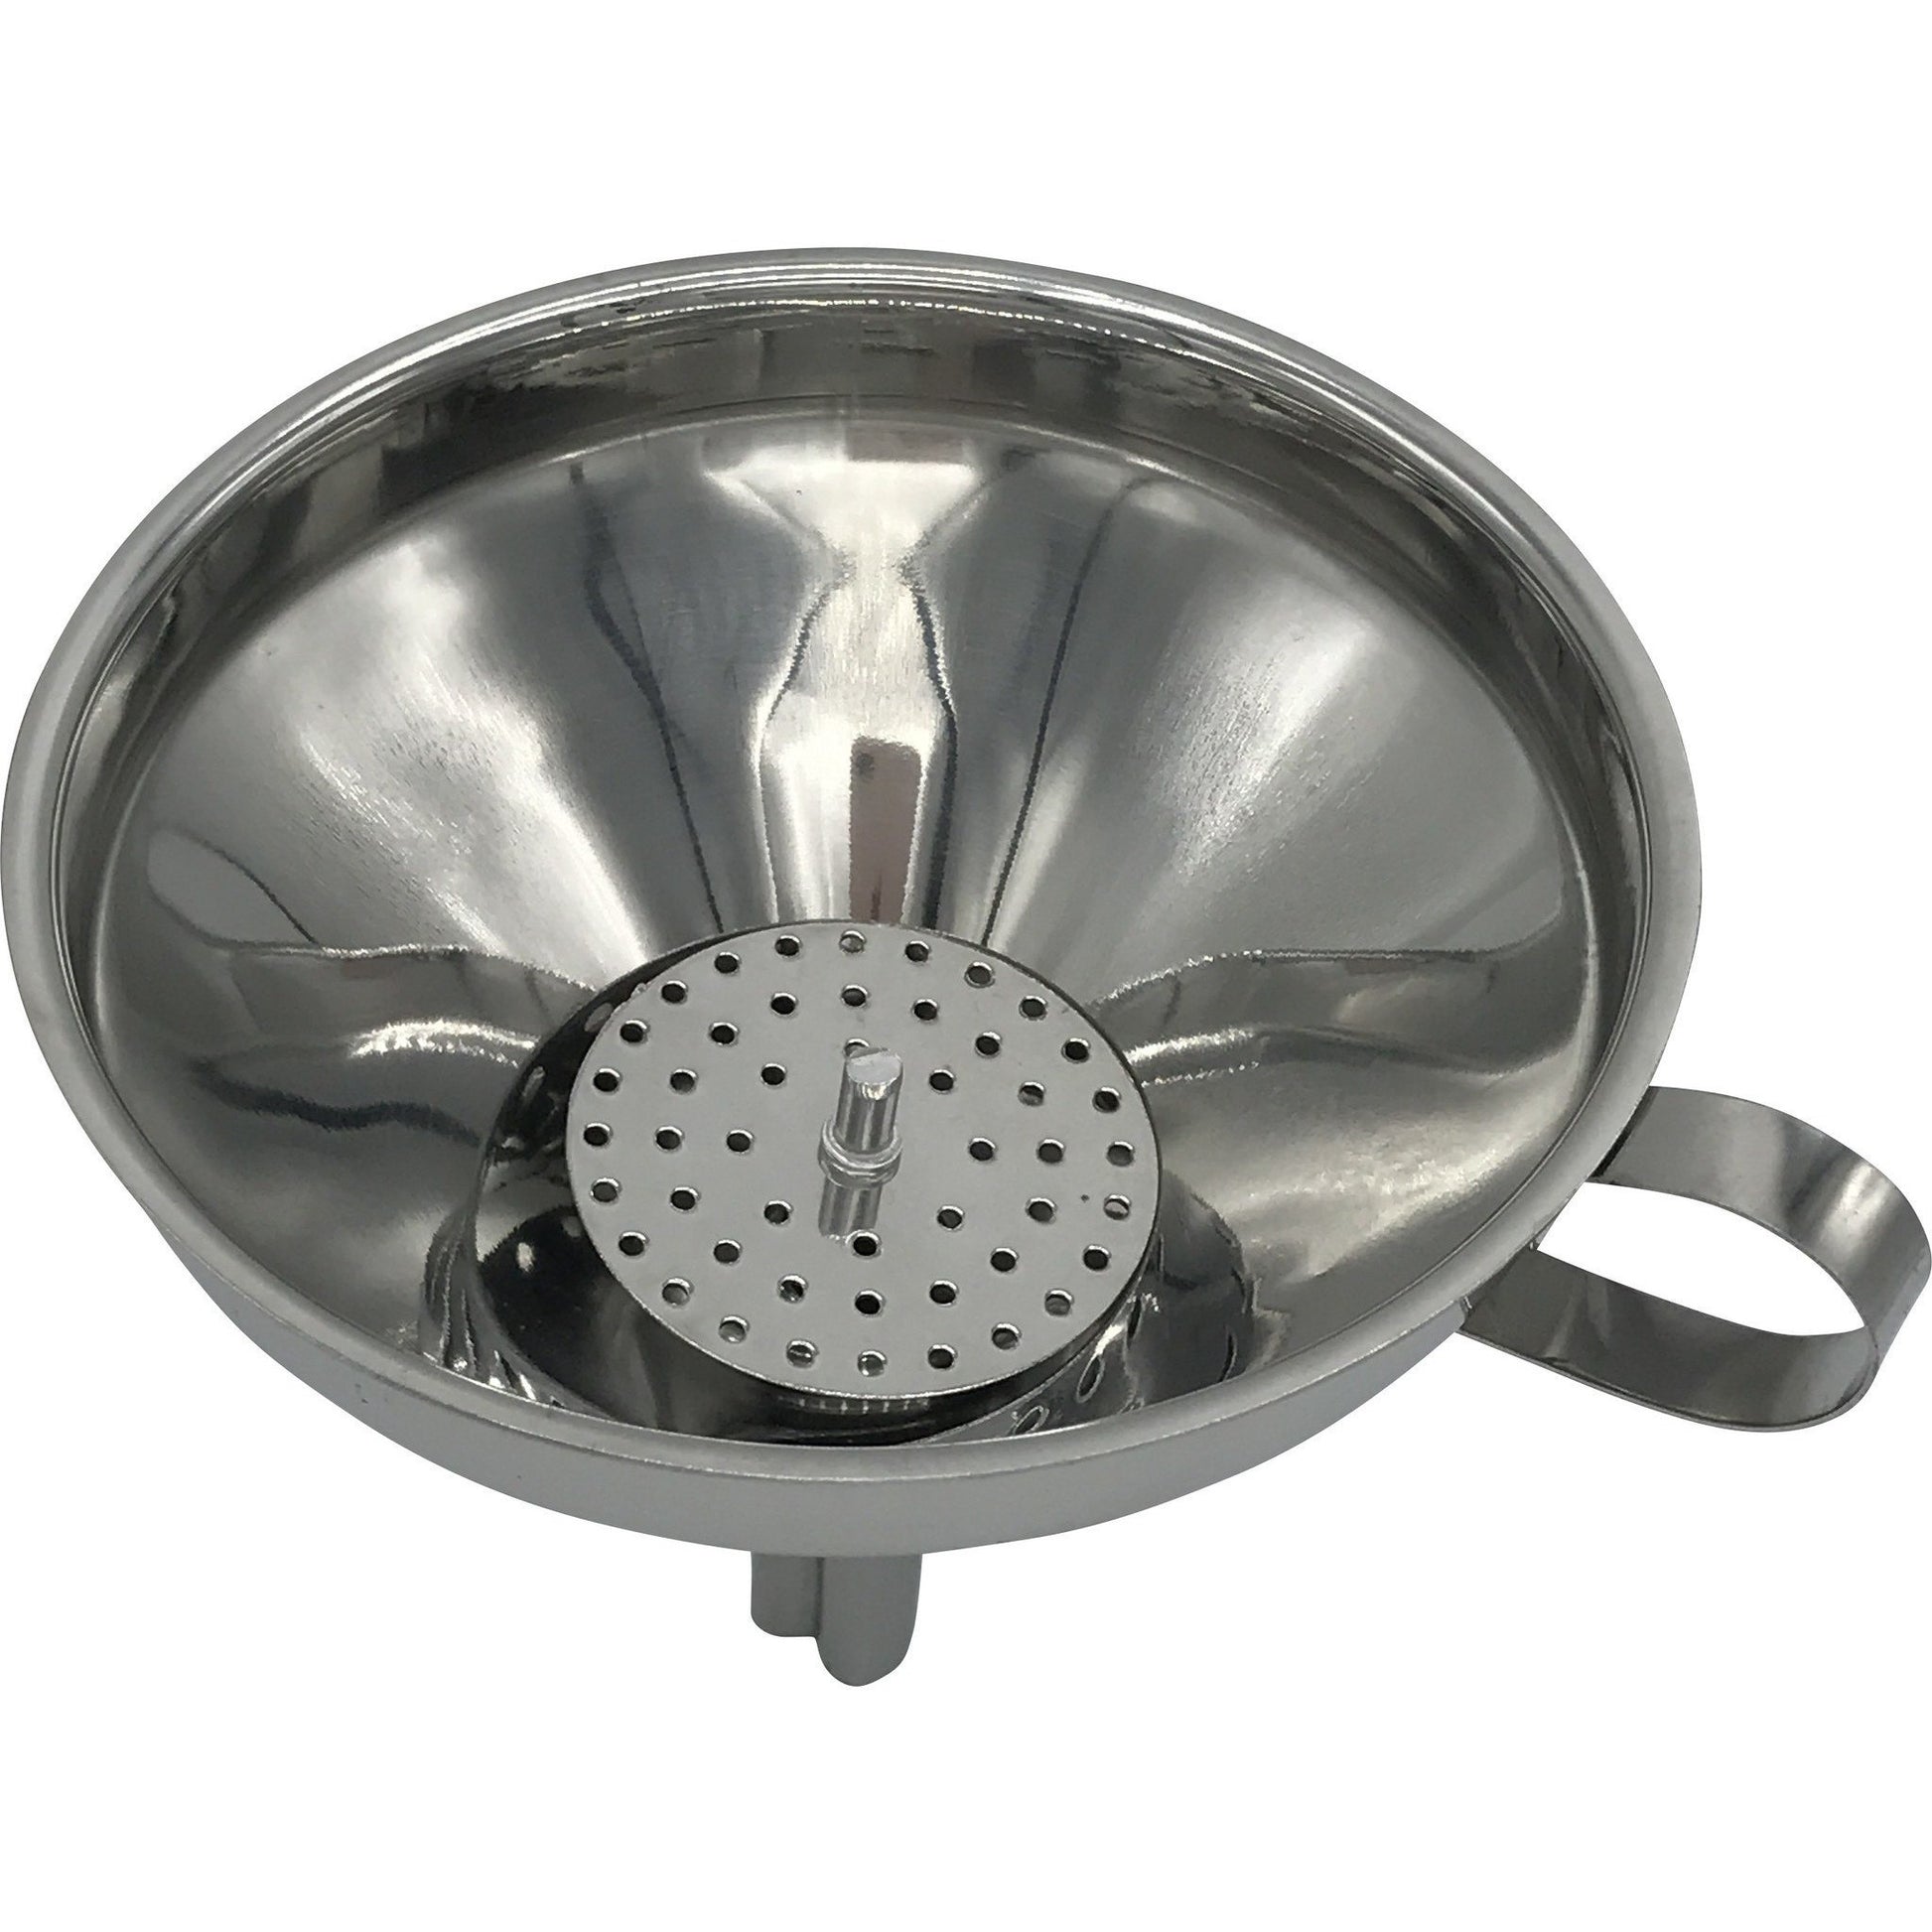 Stainless Steel Funnel with removable strainer - IcySkyy